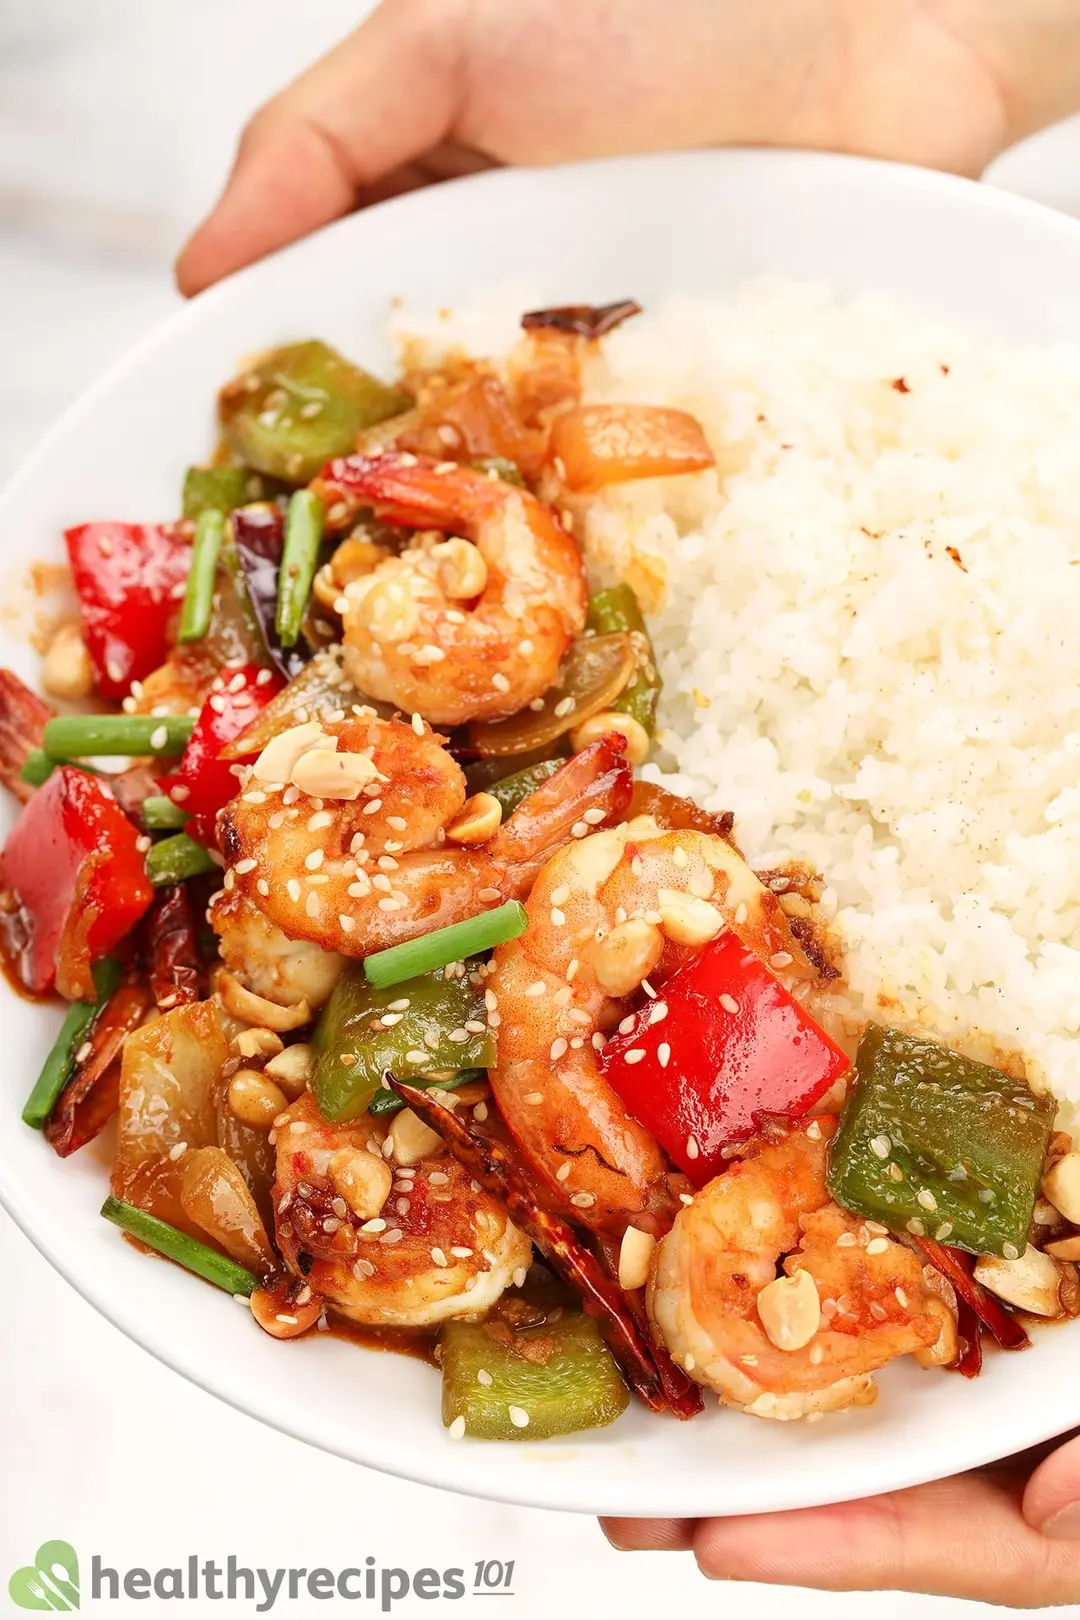 What to Serve With Kung Pao Shrimp